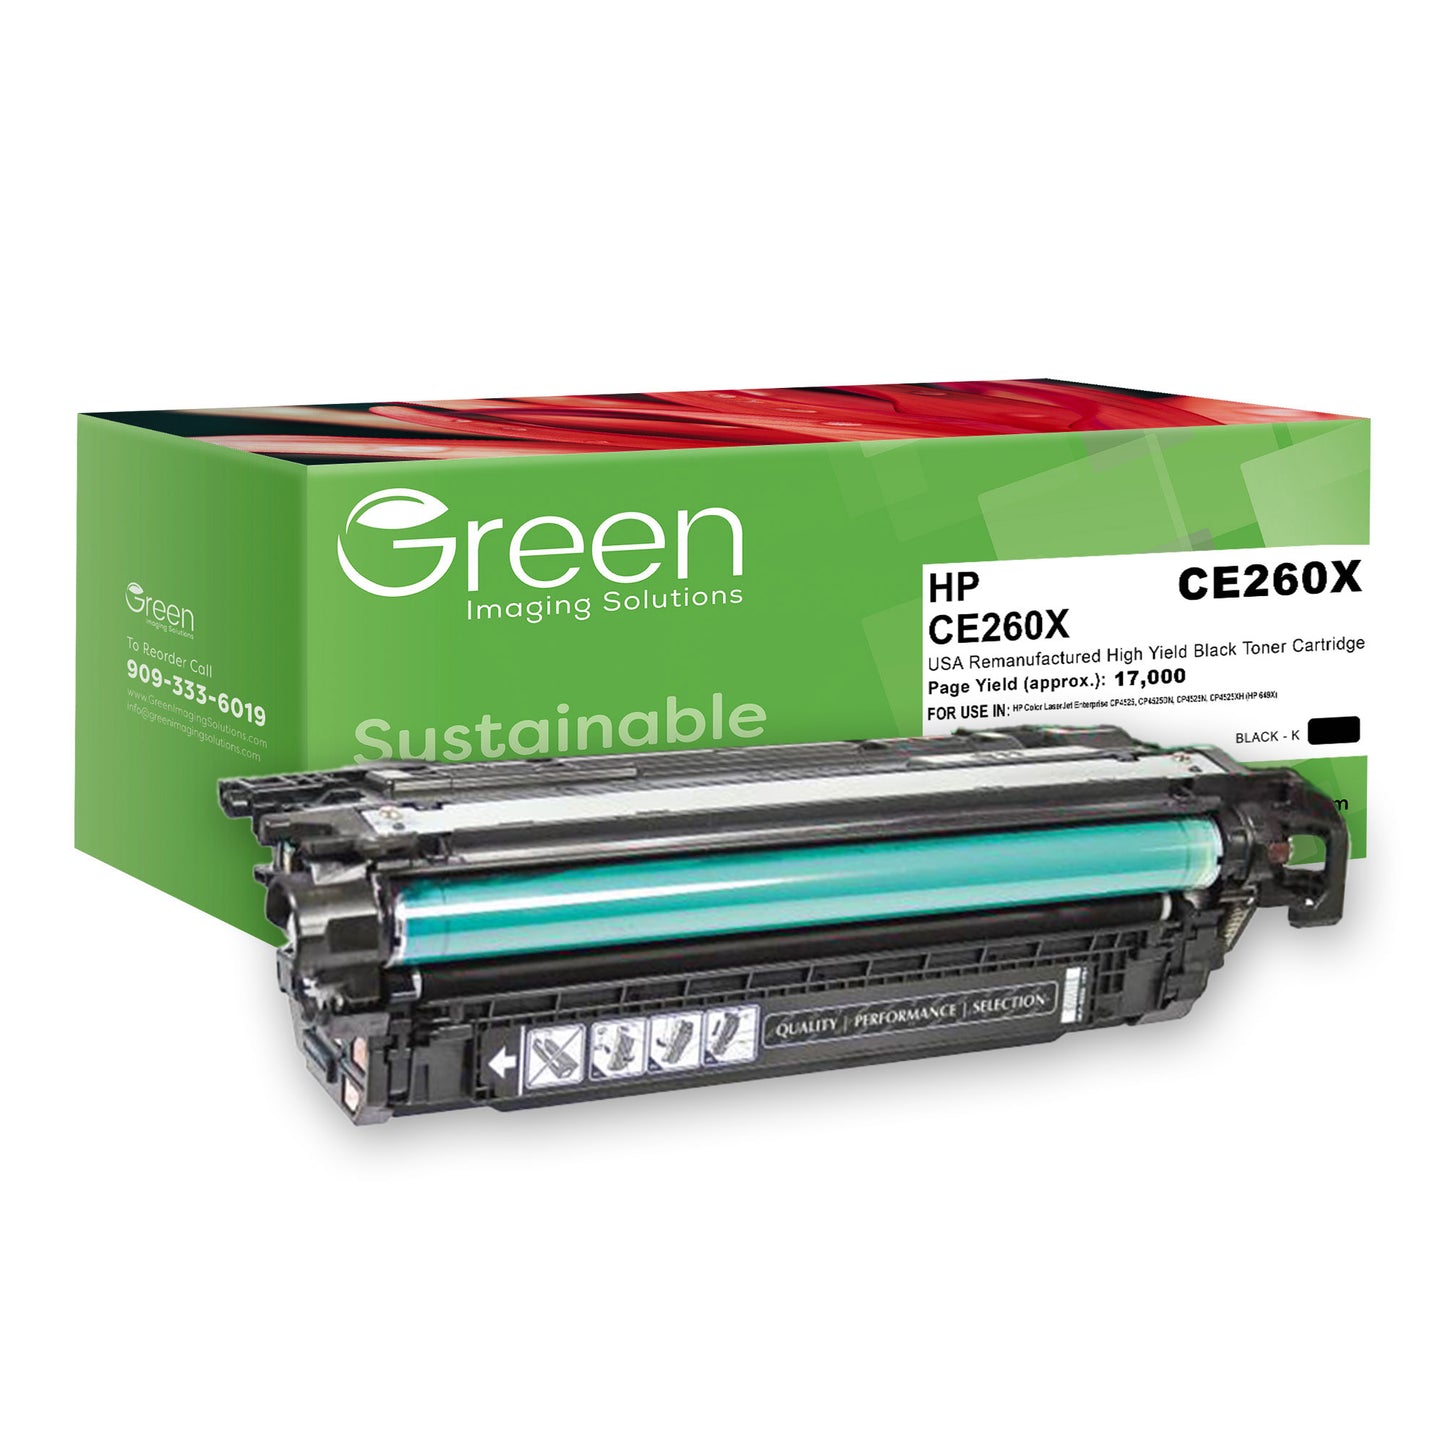 GIS USA Remanufactured High Yield Black Toner Cartridge for HP CE260X (HP 649X)